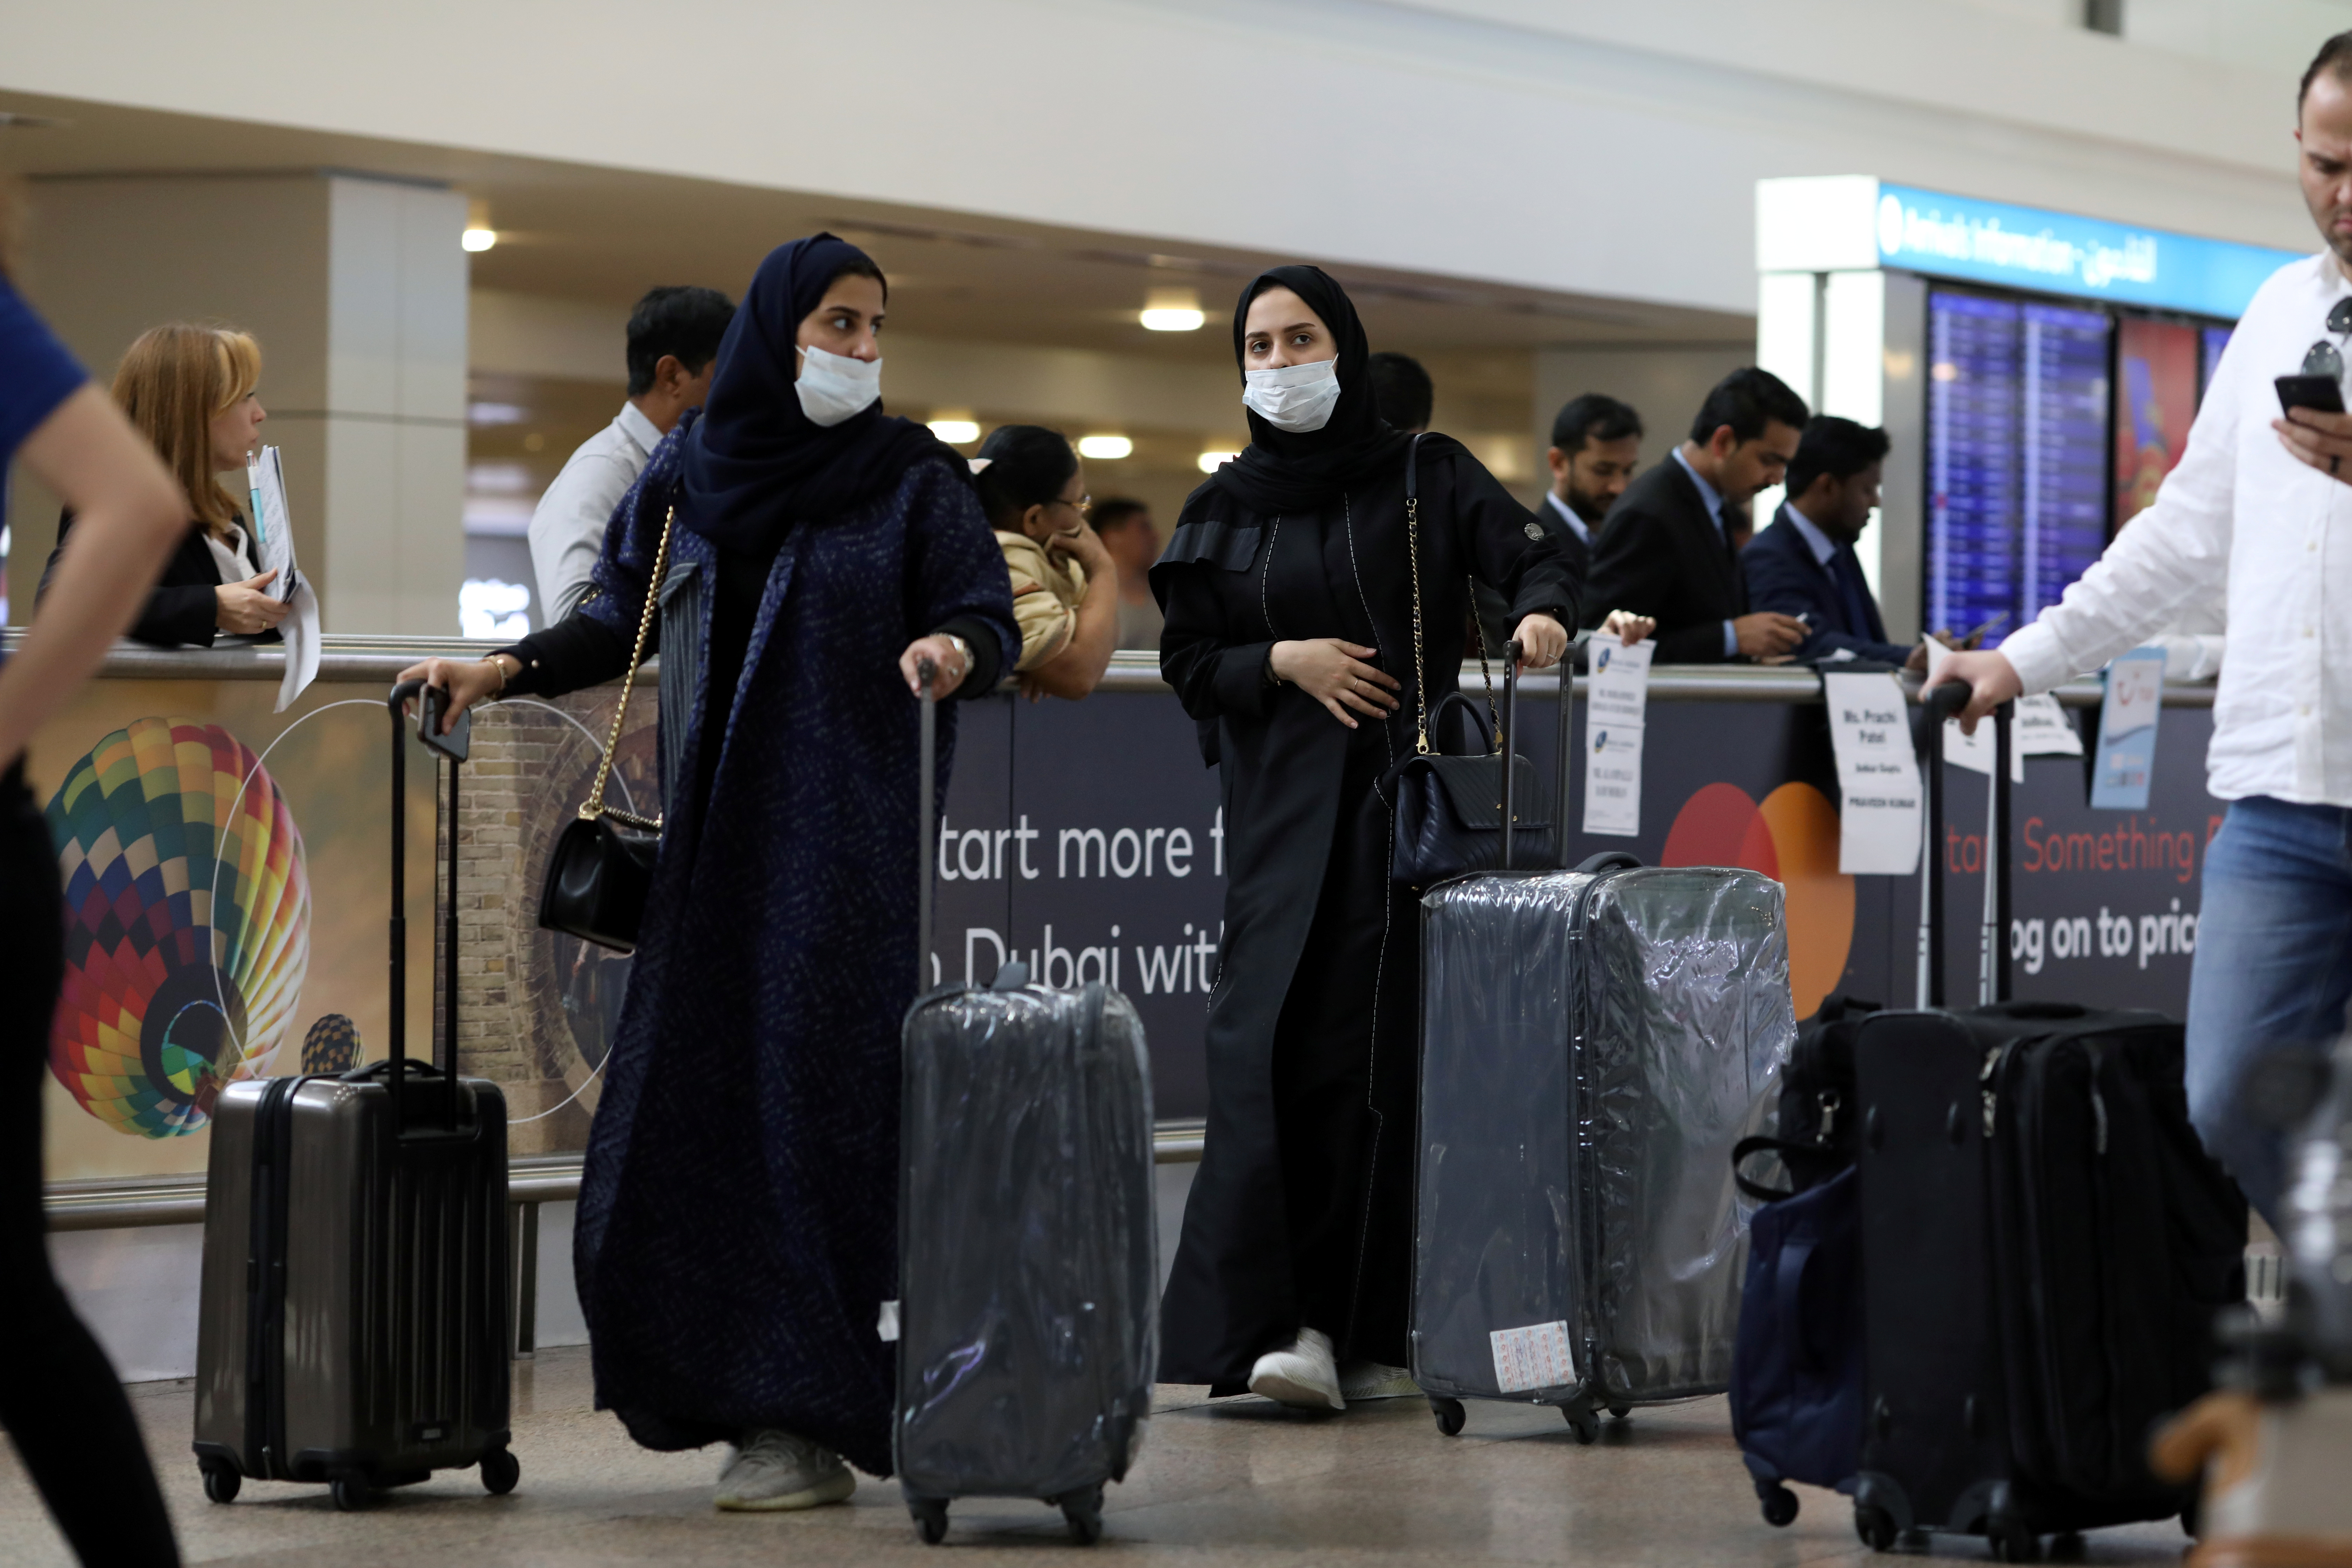 Travellers wear masks as they arrive at the Dubai International Airport, after the UAE's Ministry of Health and Community Prevention confirmed the country's first case of coronavirus, in Dubai